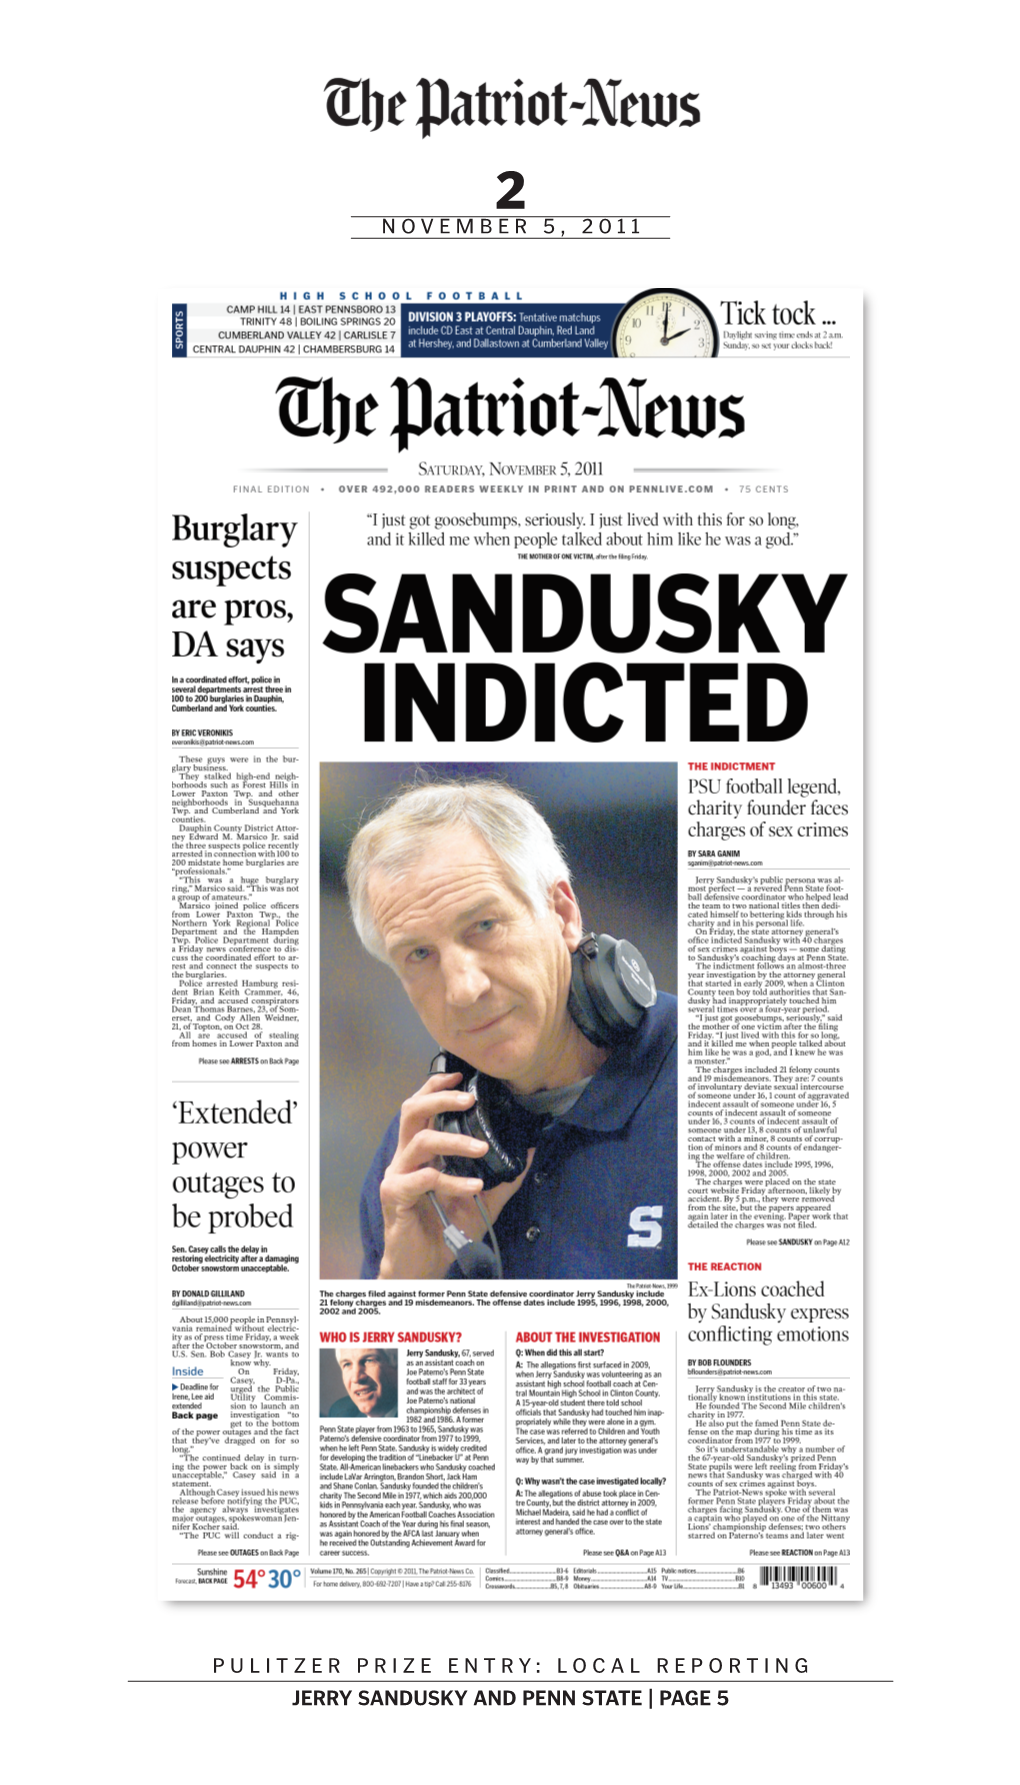 Local Reporting Jerry Sandusky and Penn State | Page 5 Sandusky Indicted November 5, 2011